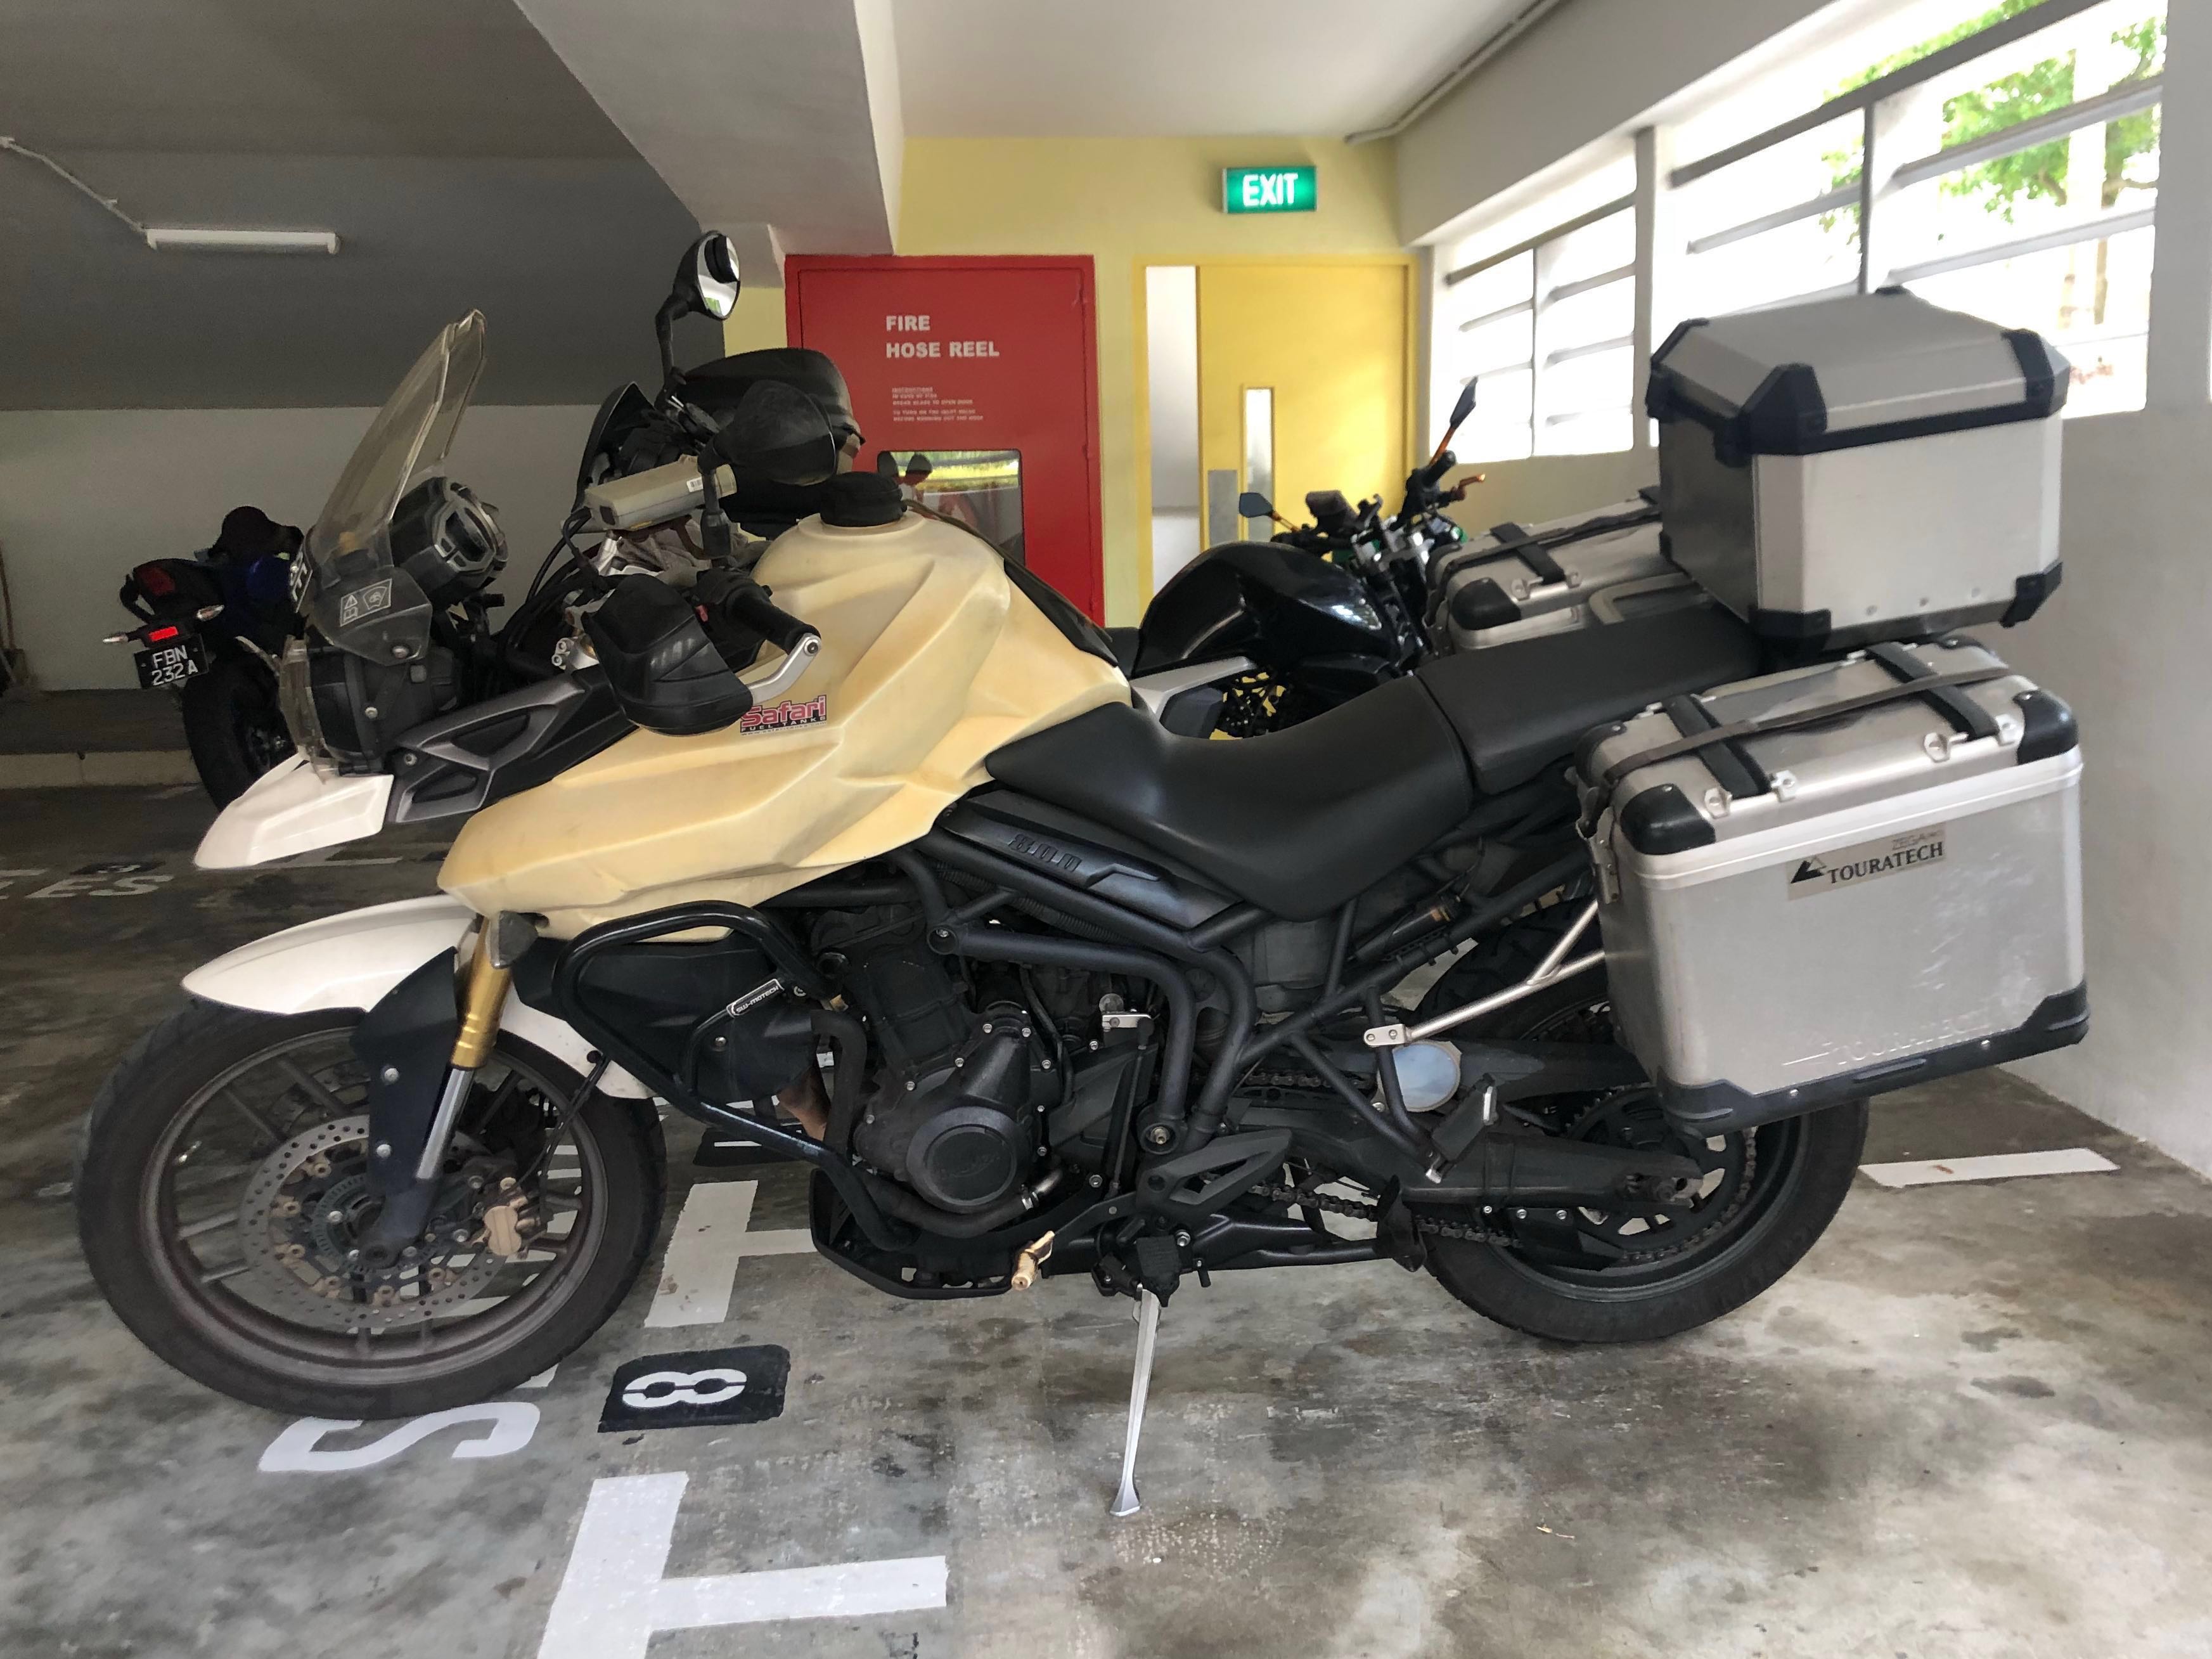 Triumph Tiger 800 Negotiable Motorcycles Motorcycles For Sale Class 2 On Carousell